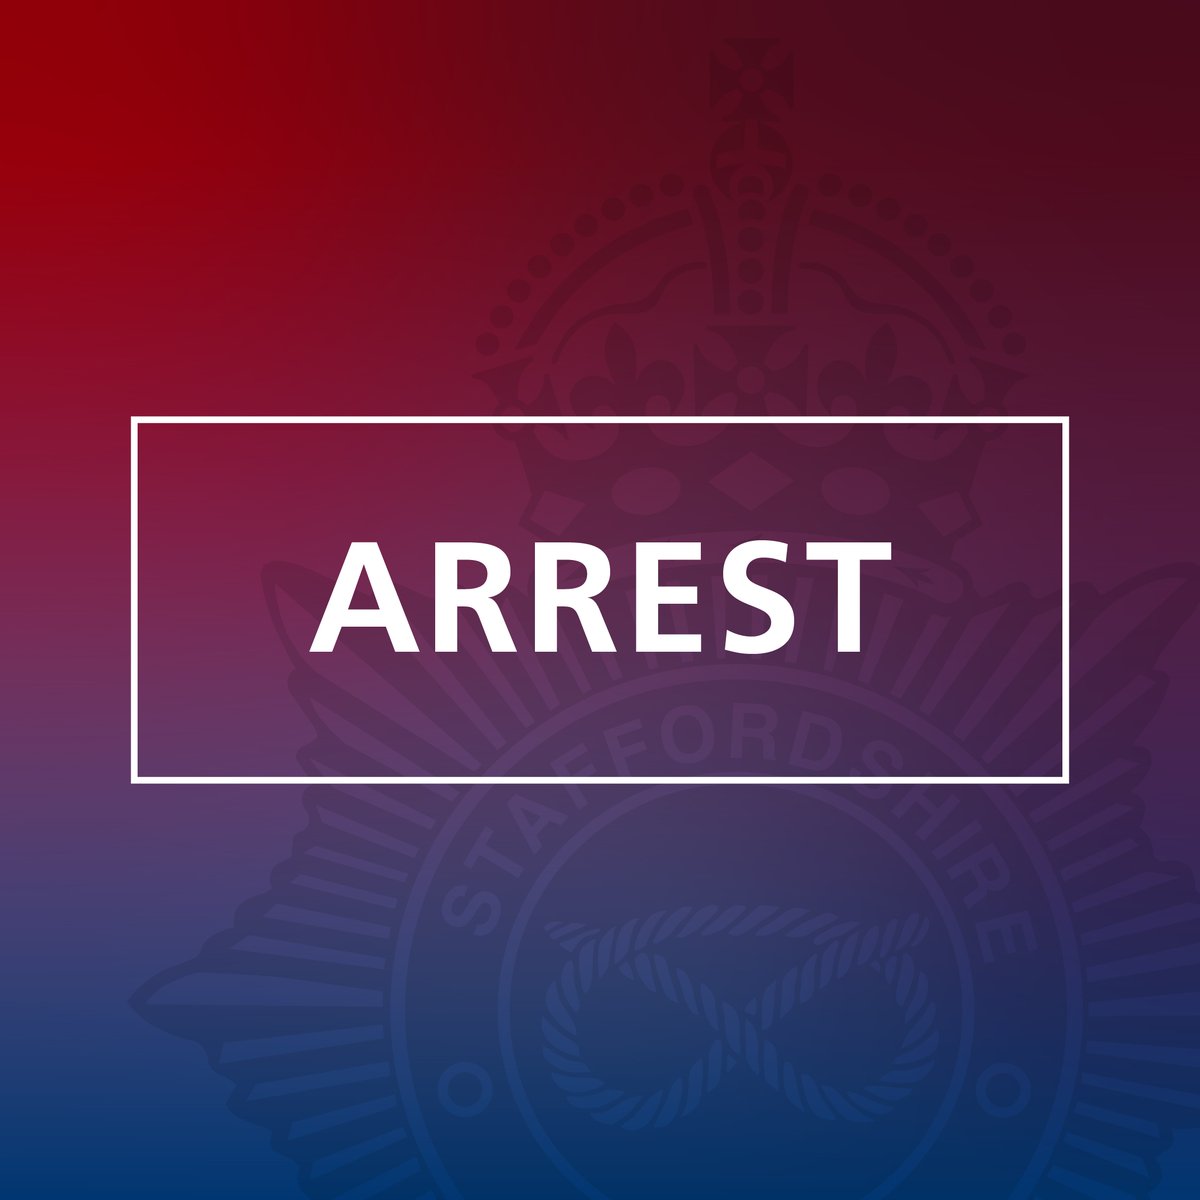 We have arrested three people following reports of disorder in Newcastle-under-Lyme. Read more here: orlo.uk/IhJeH